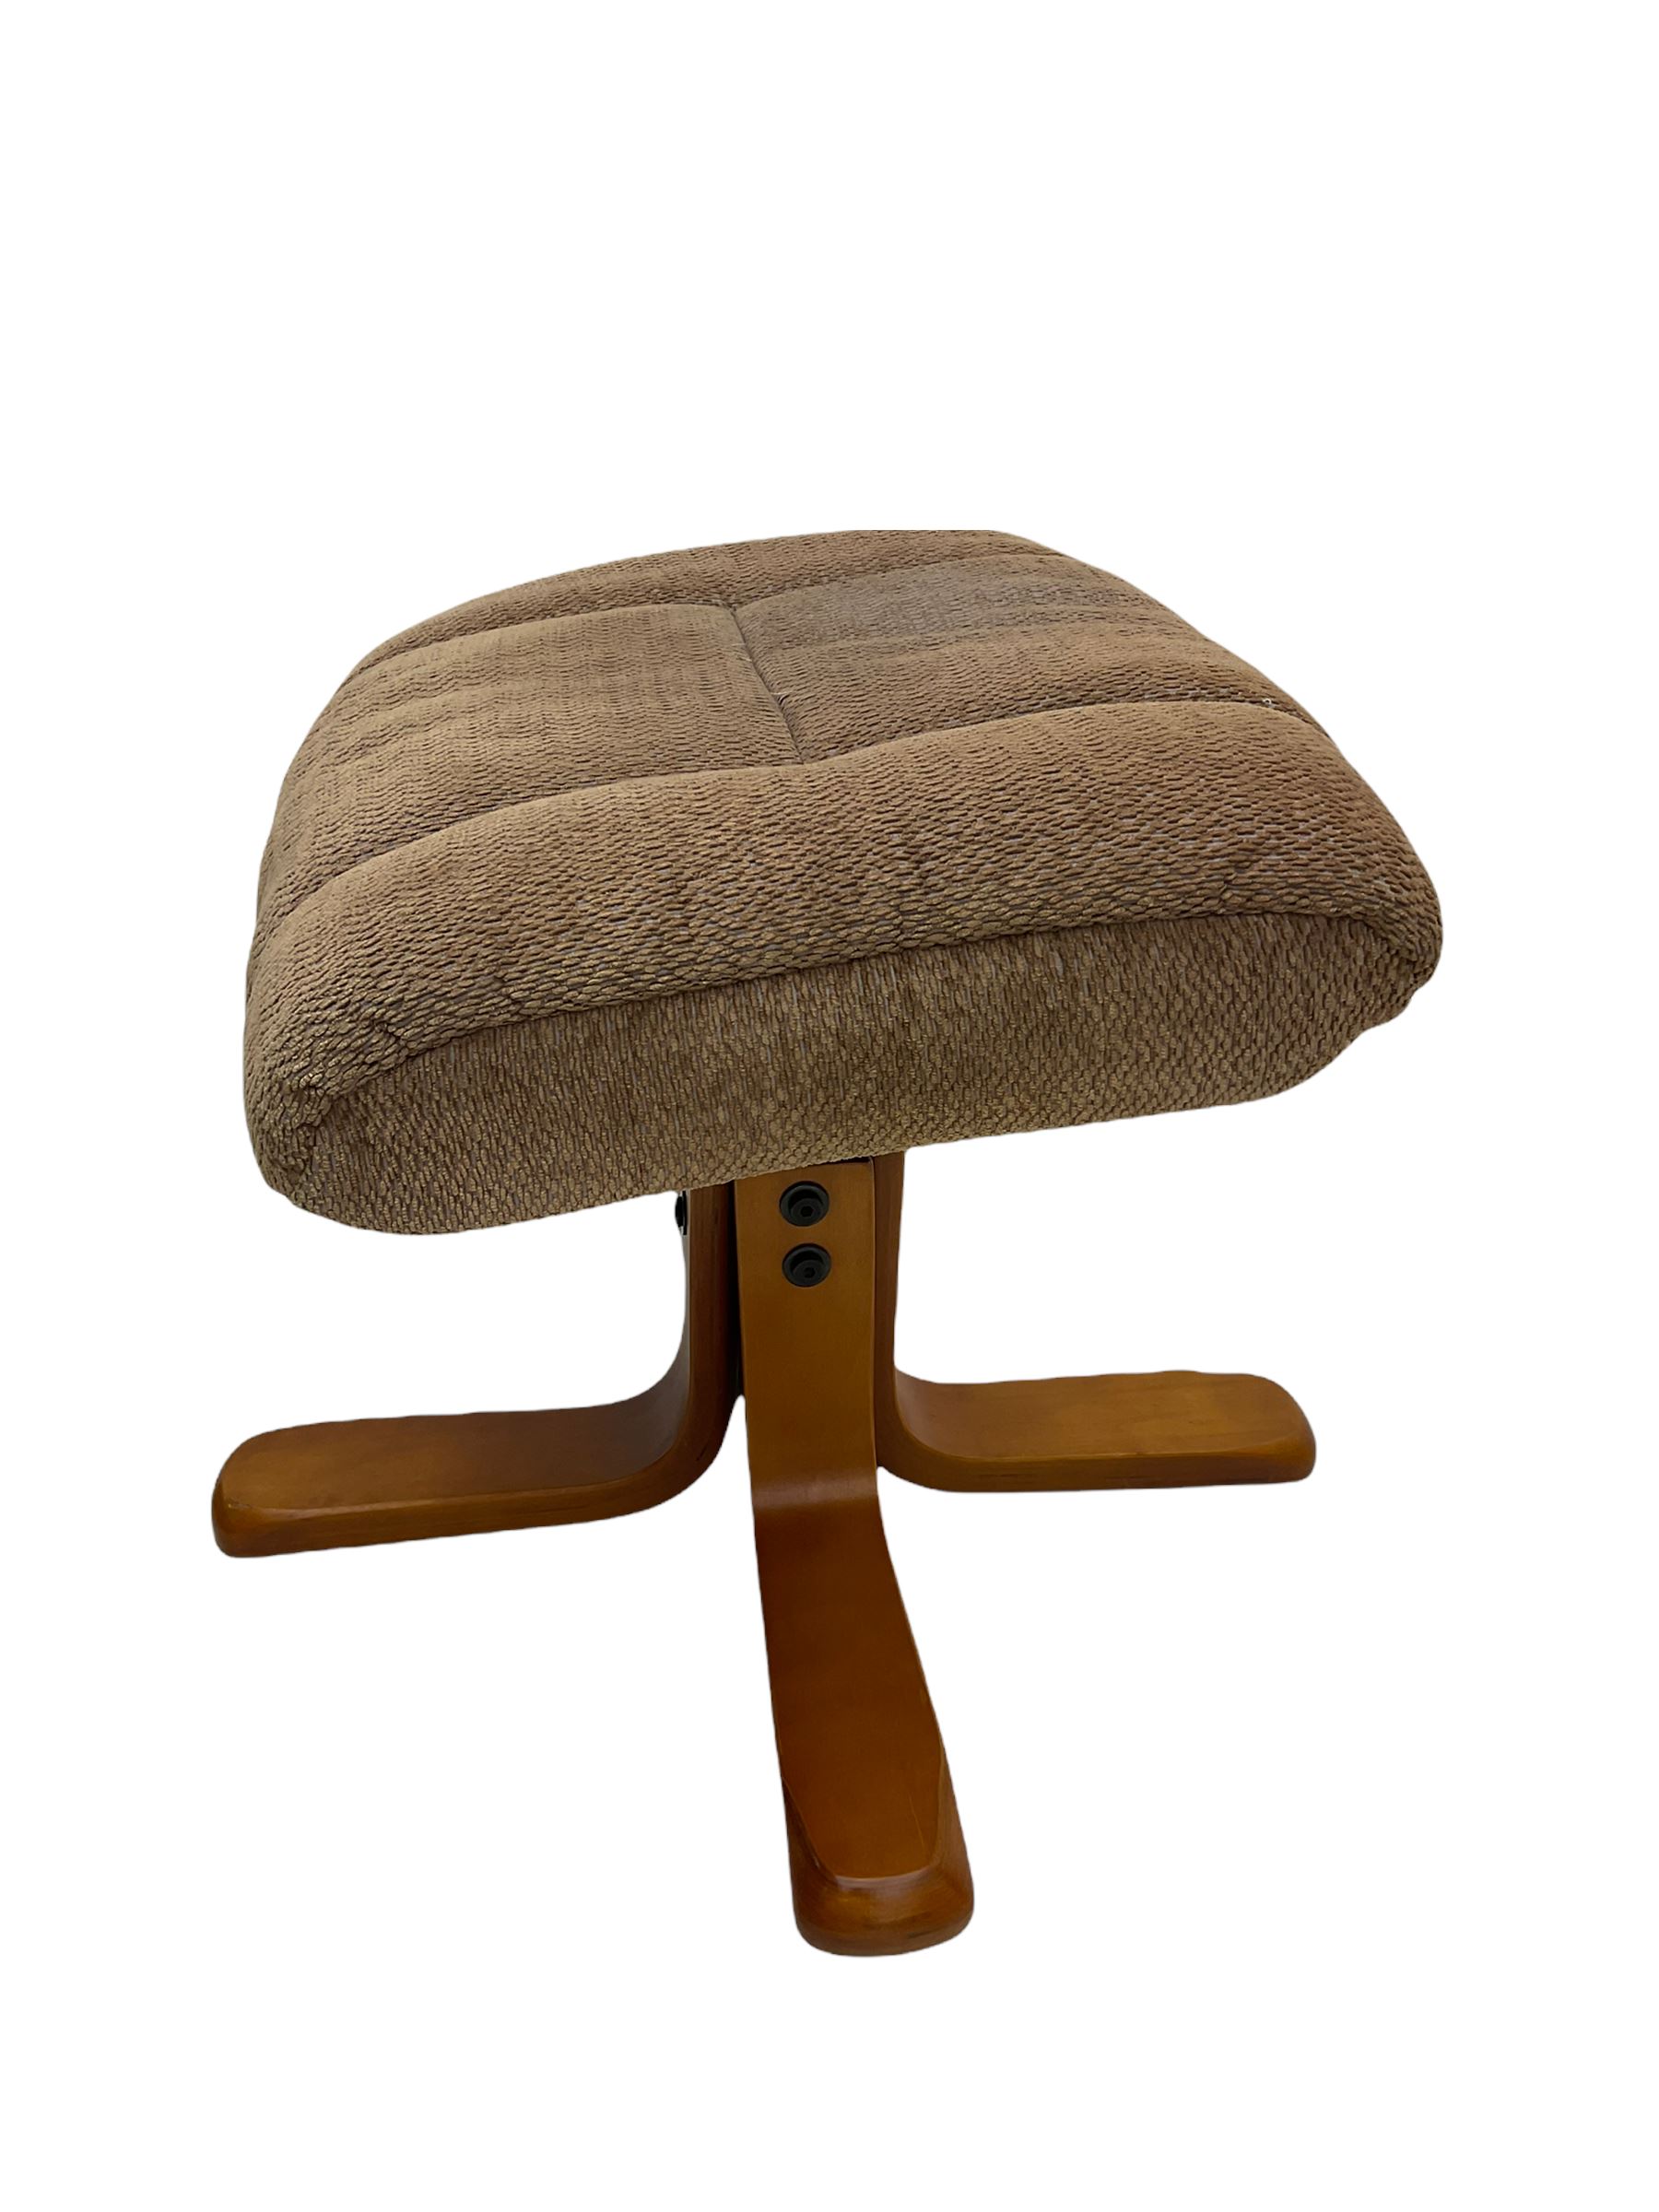 Contemporary lounge chair with matching footstool - Image 10 of 14